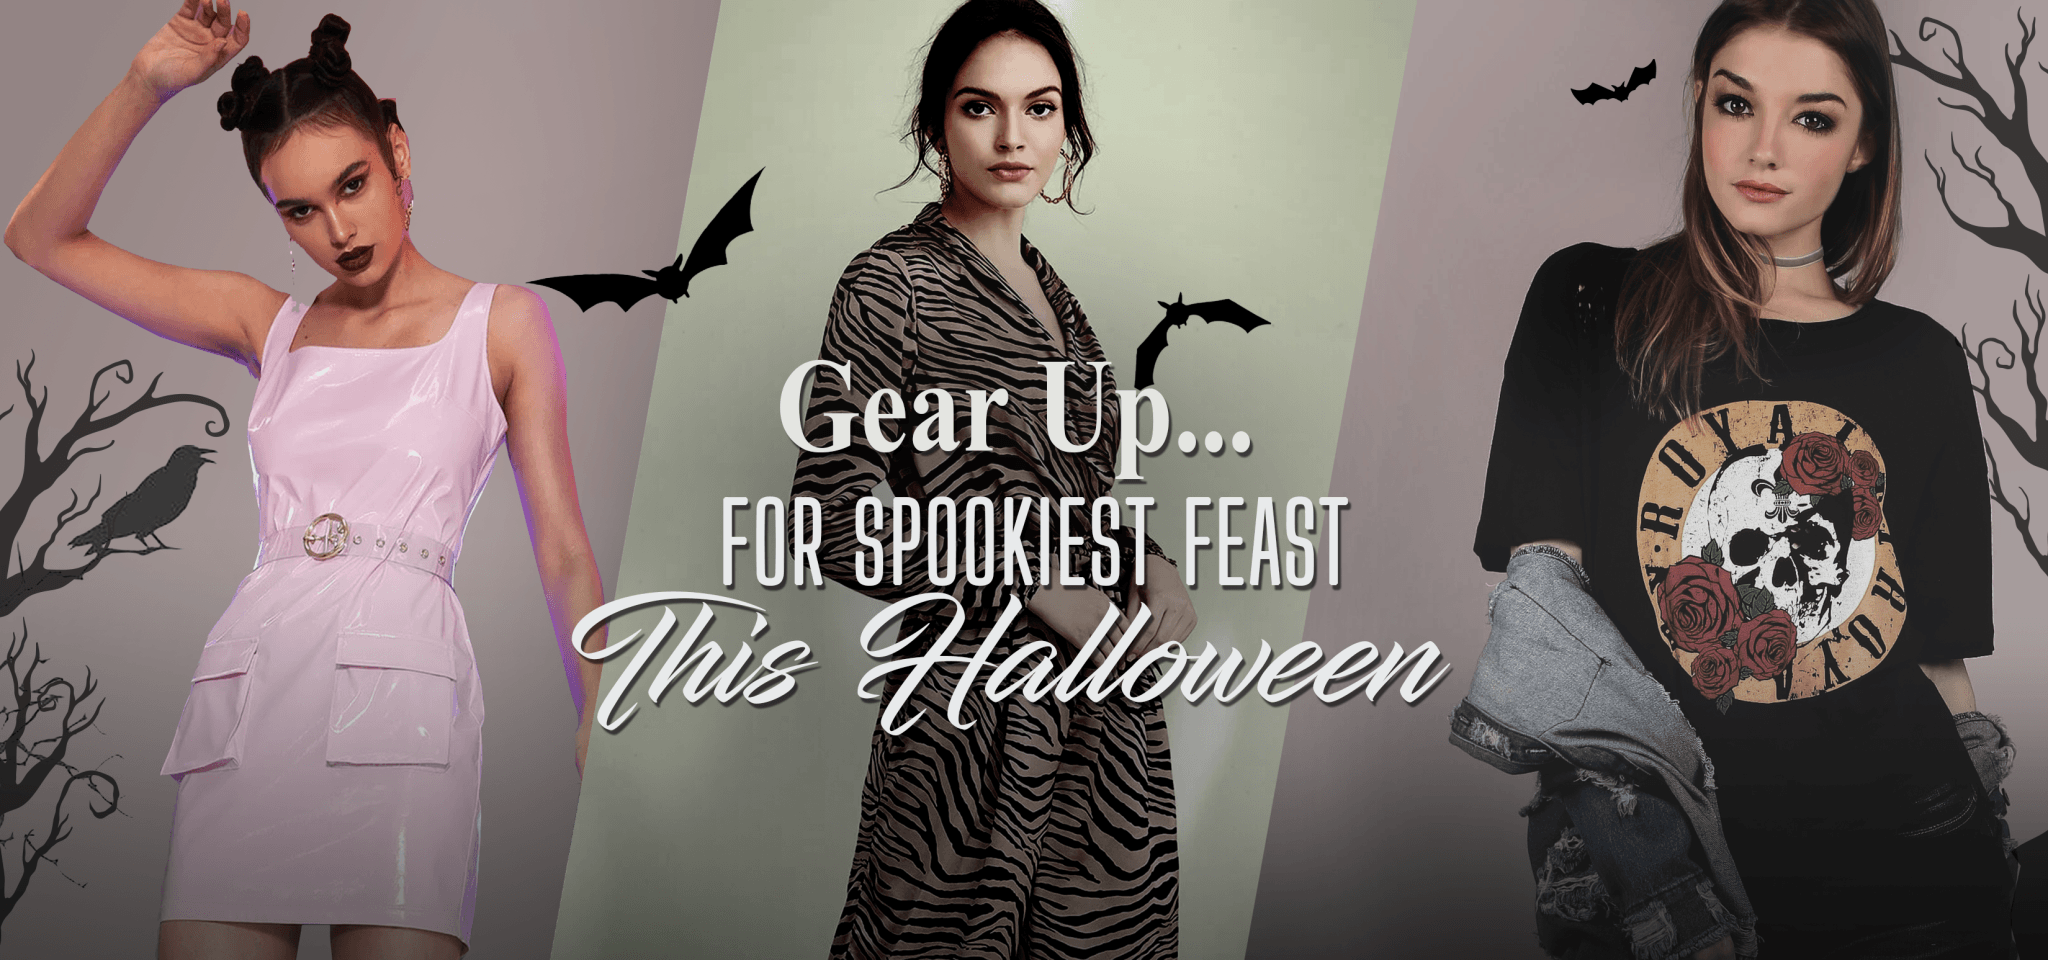 GEAR UP FOR SPOOKIEST FEAST THIS HALLOWEEN - Negative Apparel